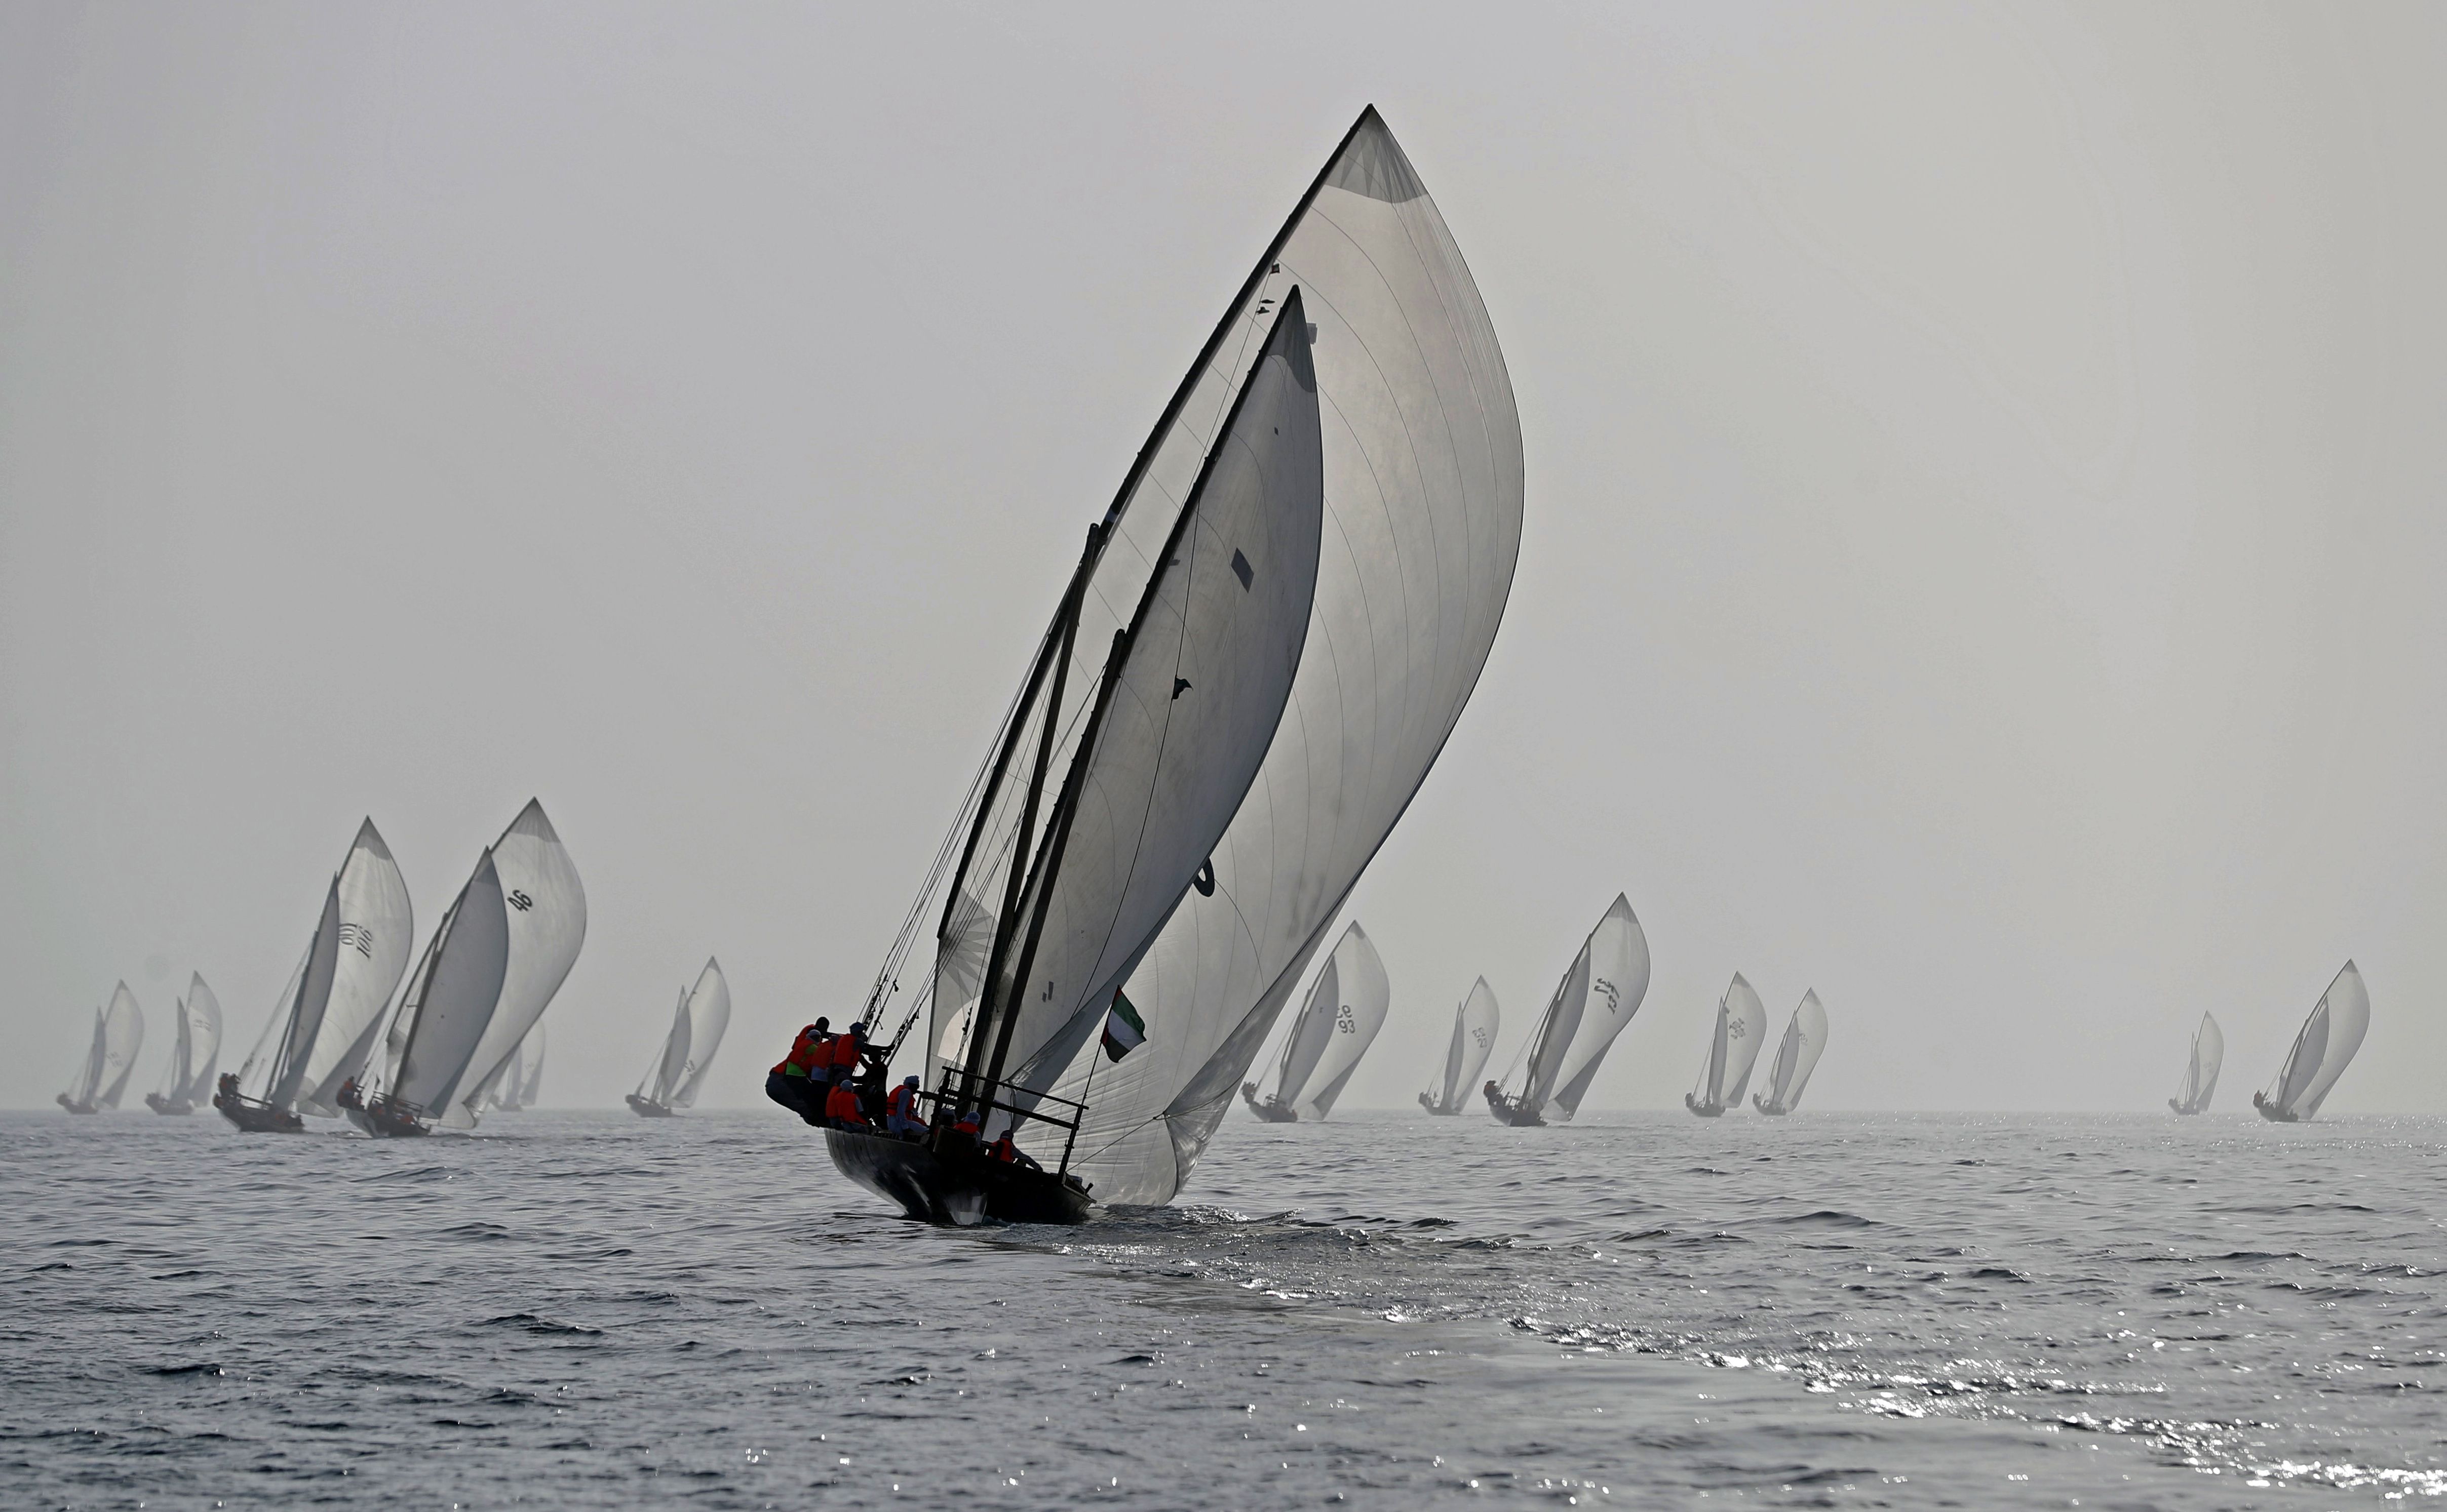 Registration for the 60ft Dhow Race Closes Today